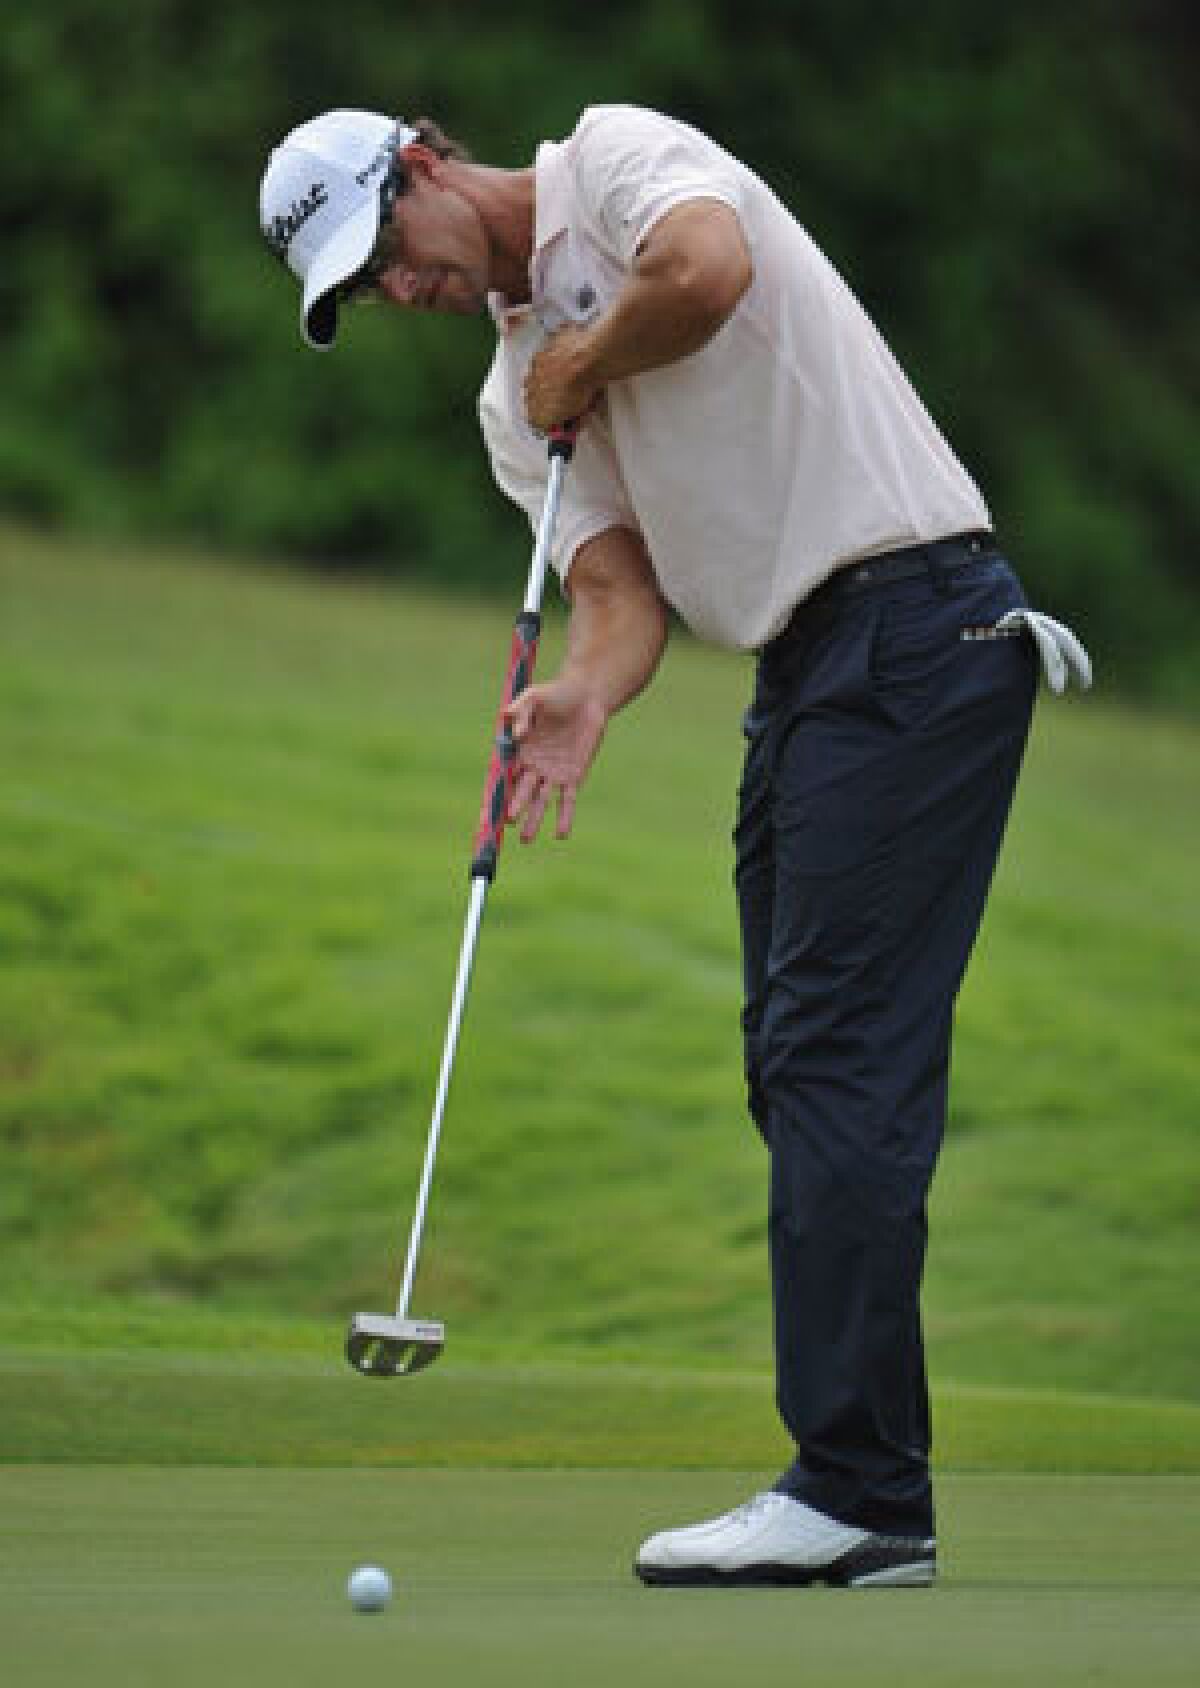 Adam Scott is one of the golfers who use a belly putter on the PGA Tour.